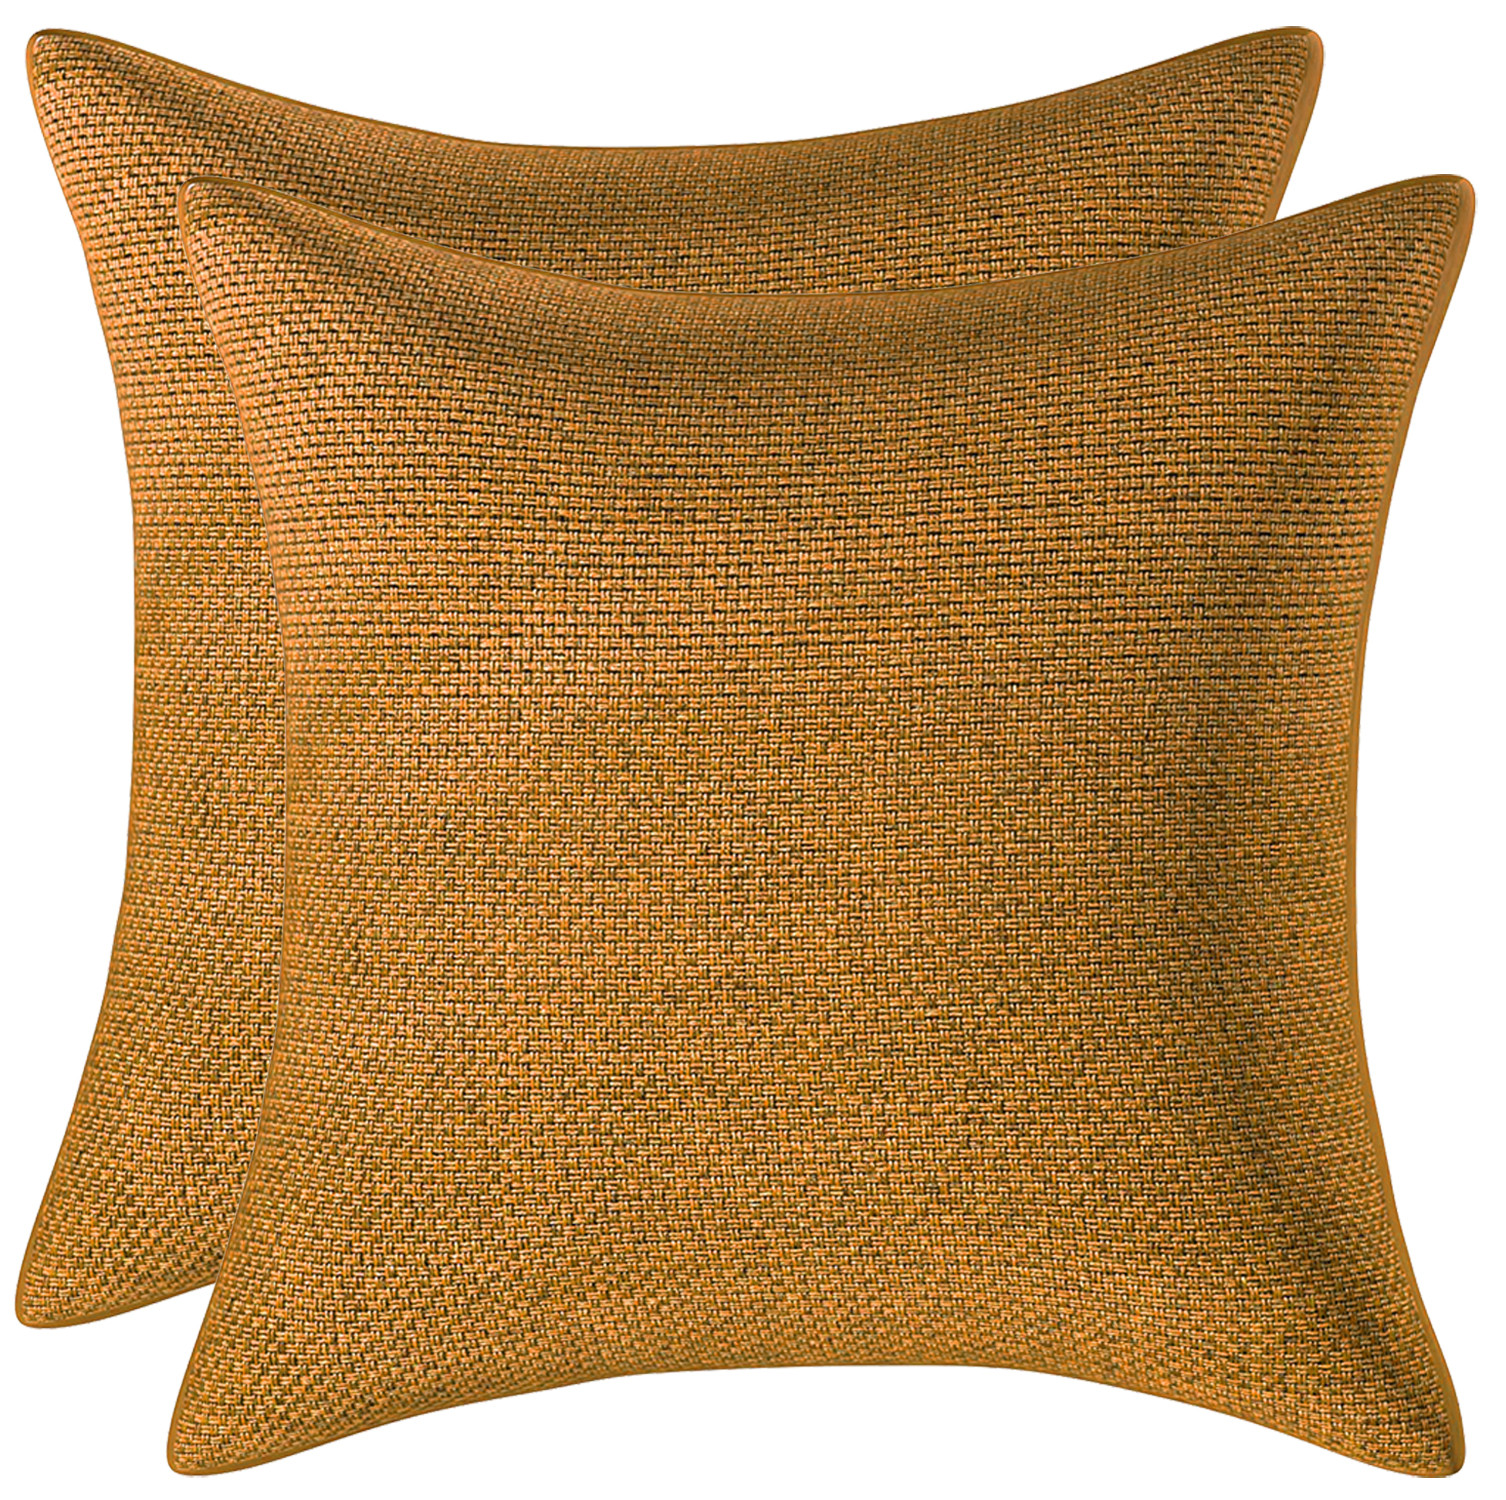 Kuber Industries Jute Blend Decorative Square Throw Pillow Cover Cushion Covers Pillowcase, Home Decor Decorations for Sofa Couch Bed Chair 24x24 Inch- (Gold)